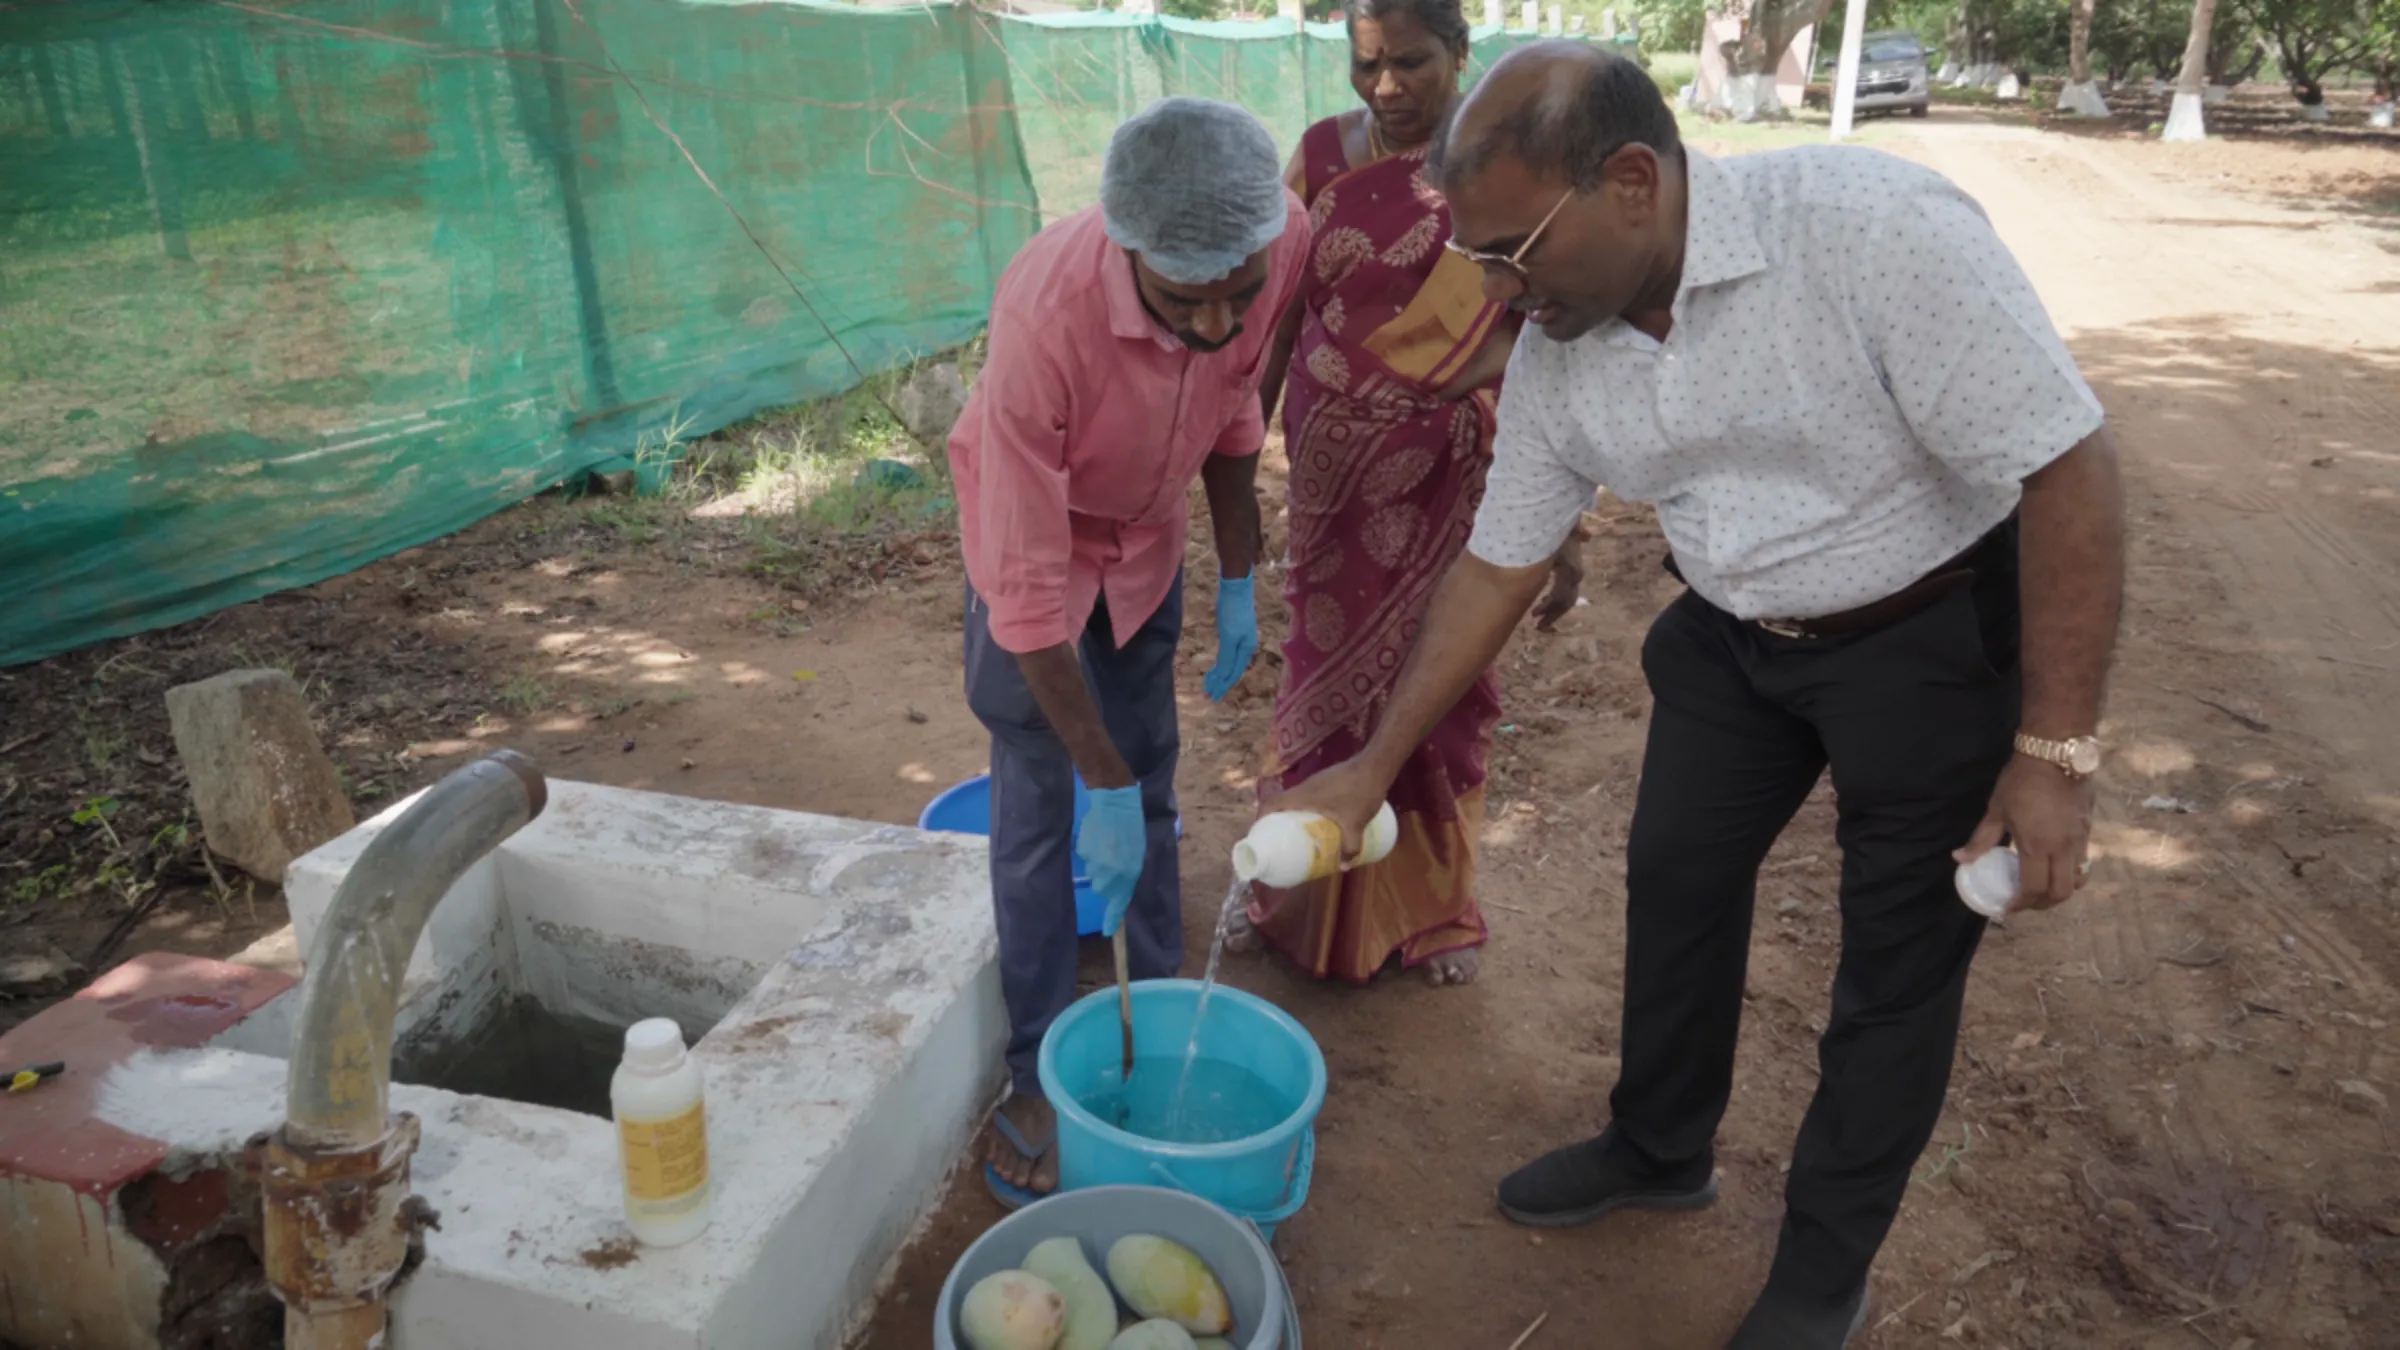 K S Subramanian, former director of research at the Tamil Nadu Agriculture University shows a chemical solution used to prolong the life of mangoes in this screengrab from the Context 'Rerooted' video series. Thomson Reuters Foundation/Albert Han